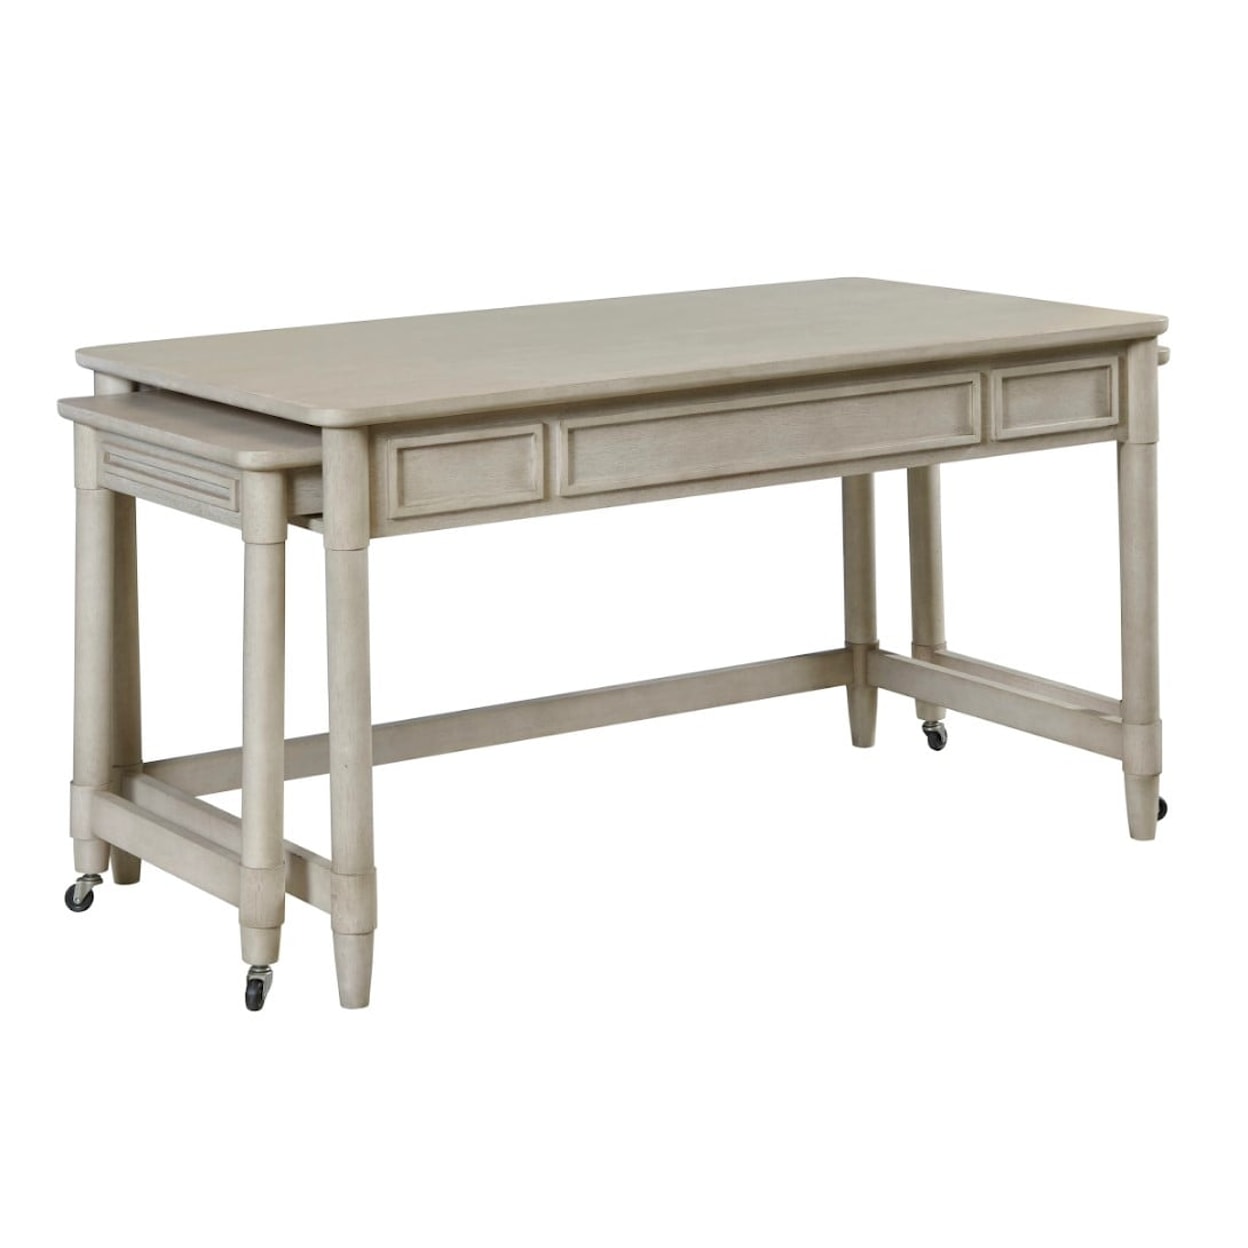 Hammary Domaine Lift-Top Drafting Desk